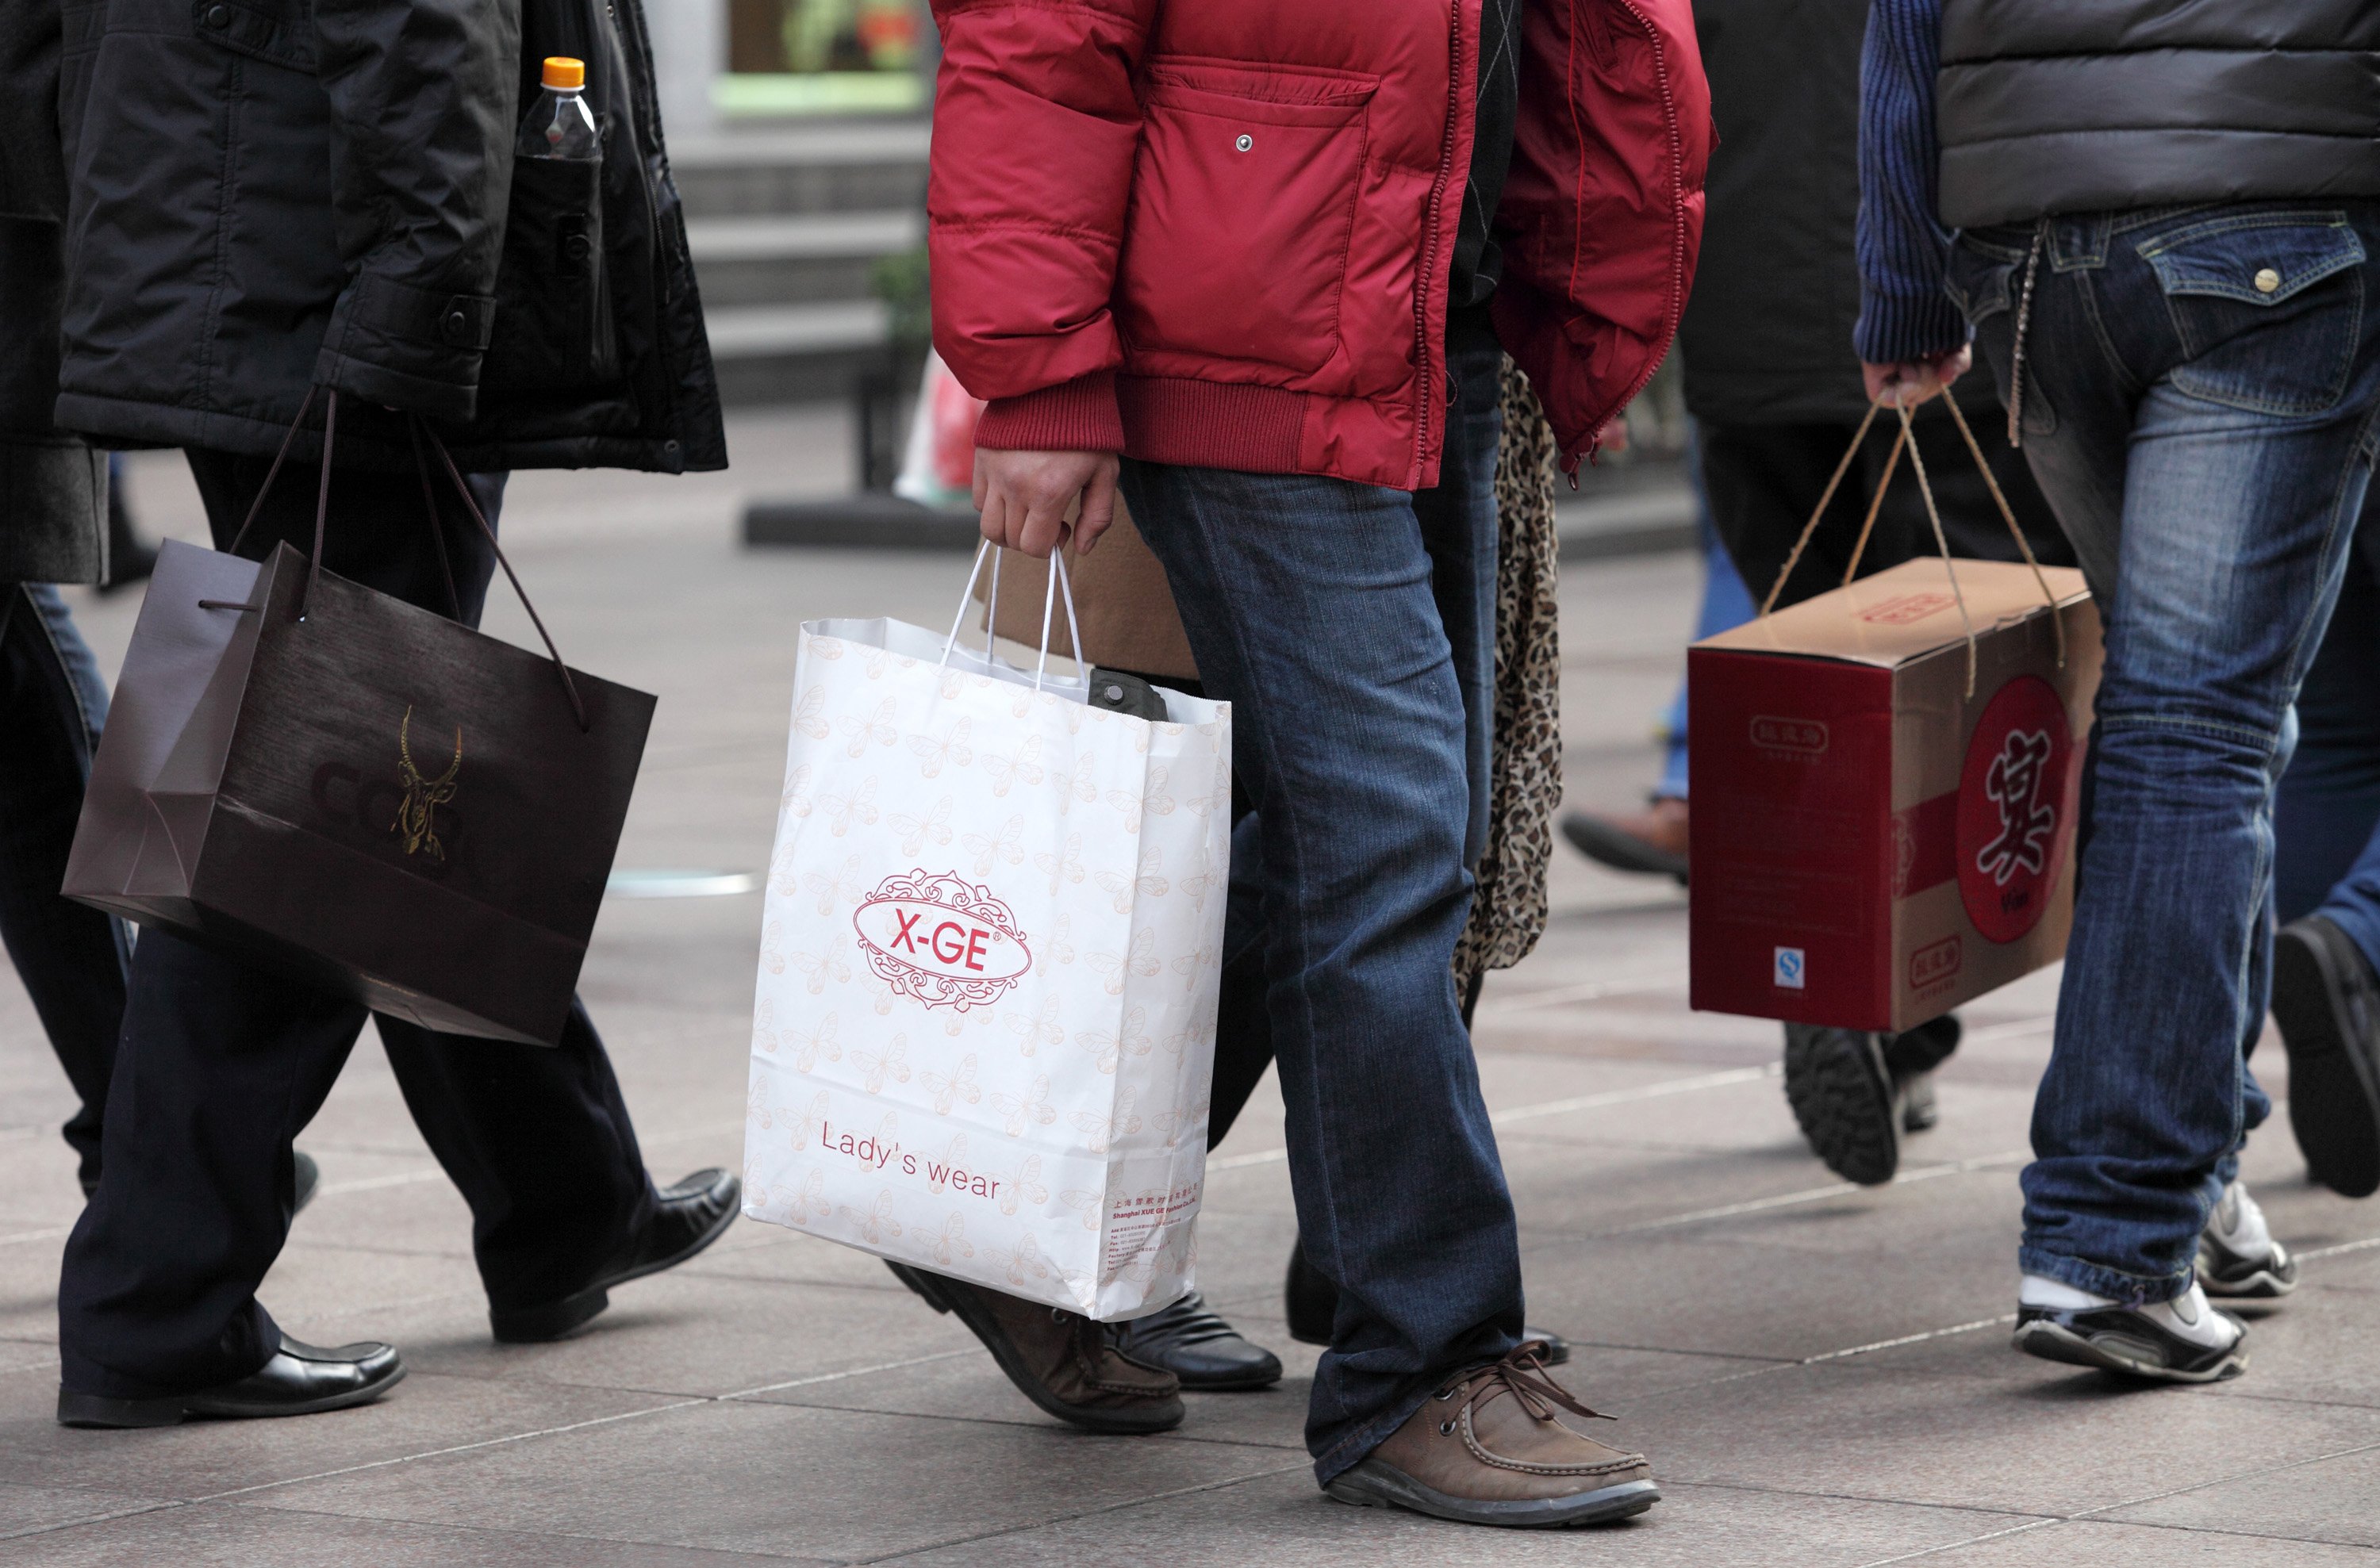 The consumer sentiment index in China declined to 112 in February from 112.1 in January. Photo: Bloomberg